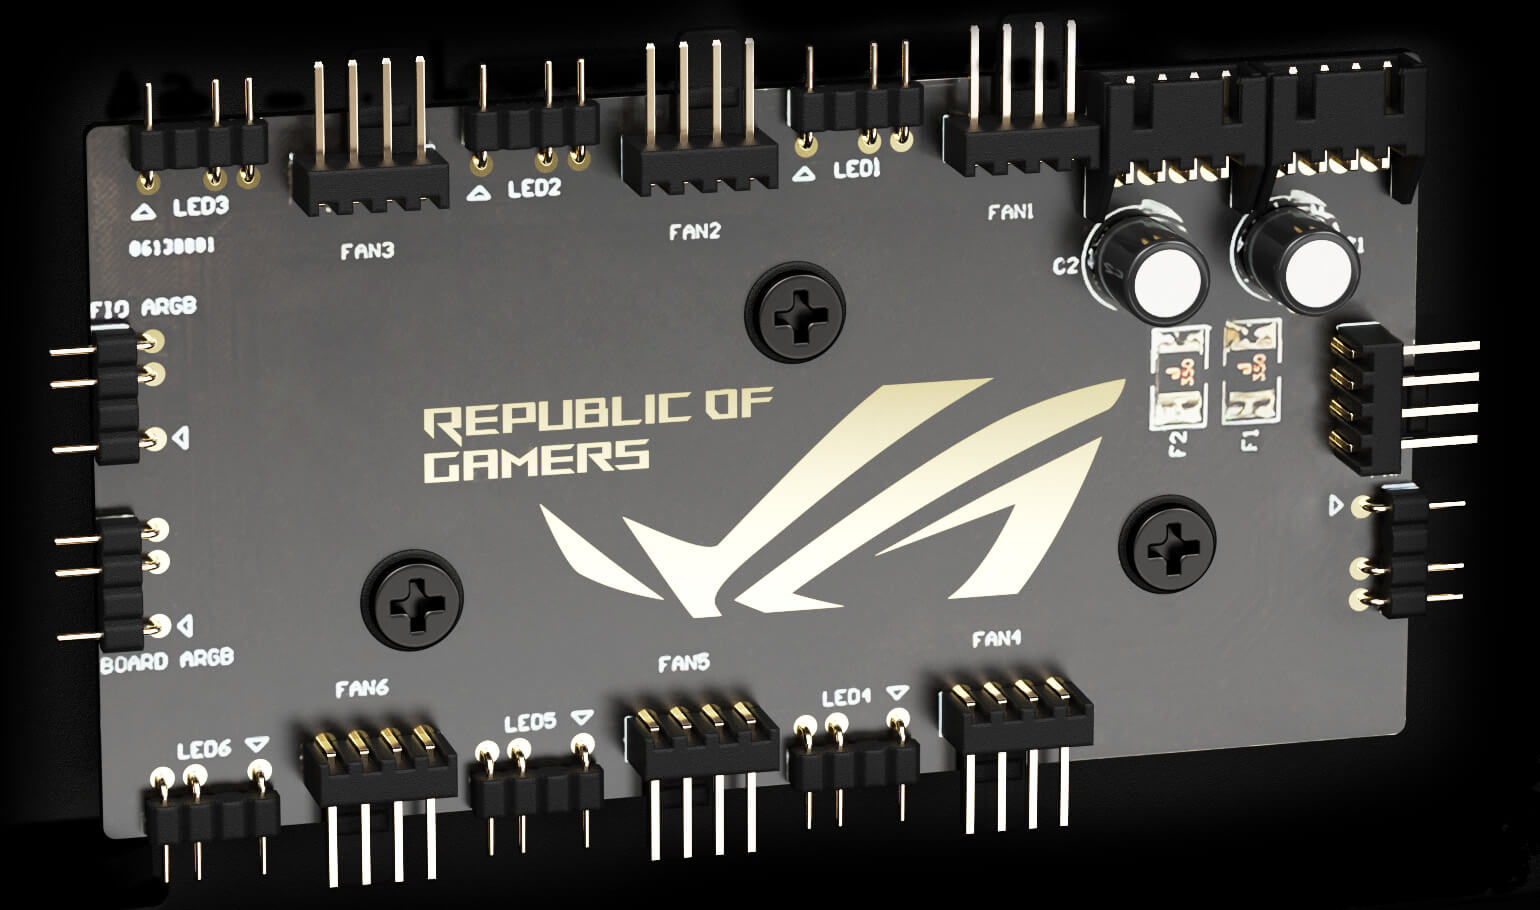 integrated ARGB and fan hub of ROG Hyperion GR701 BTF Edition